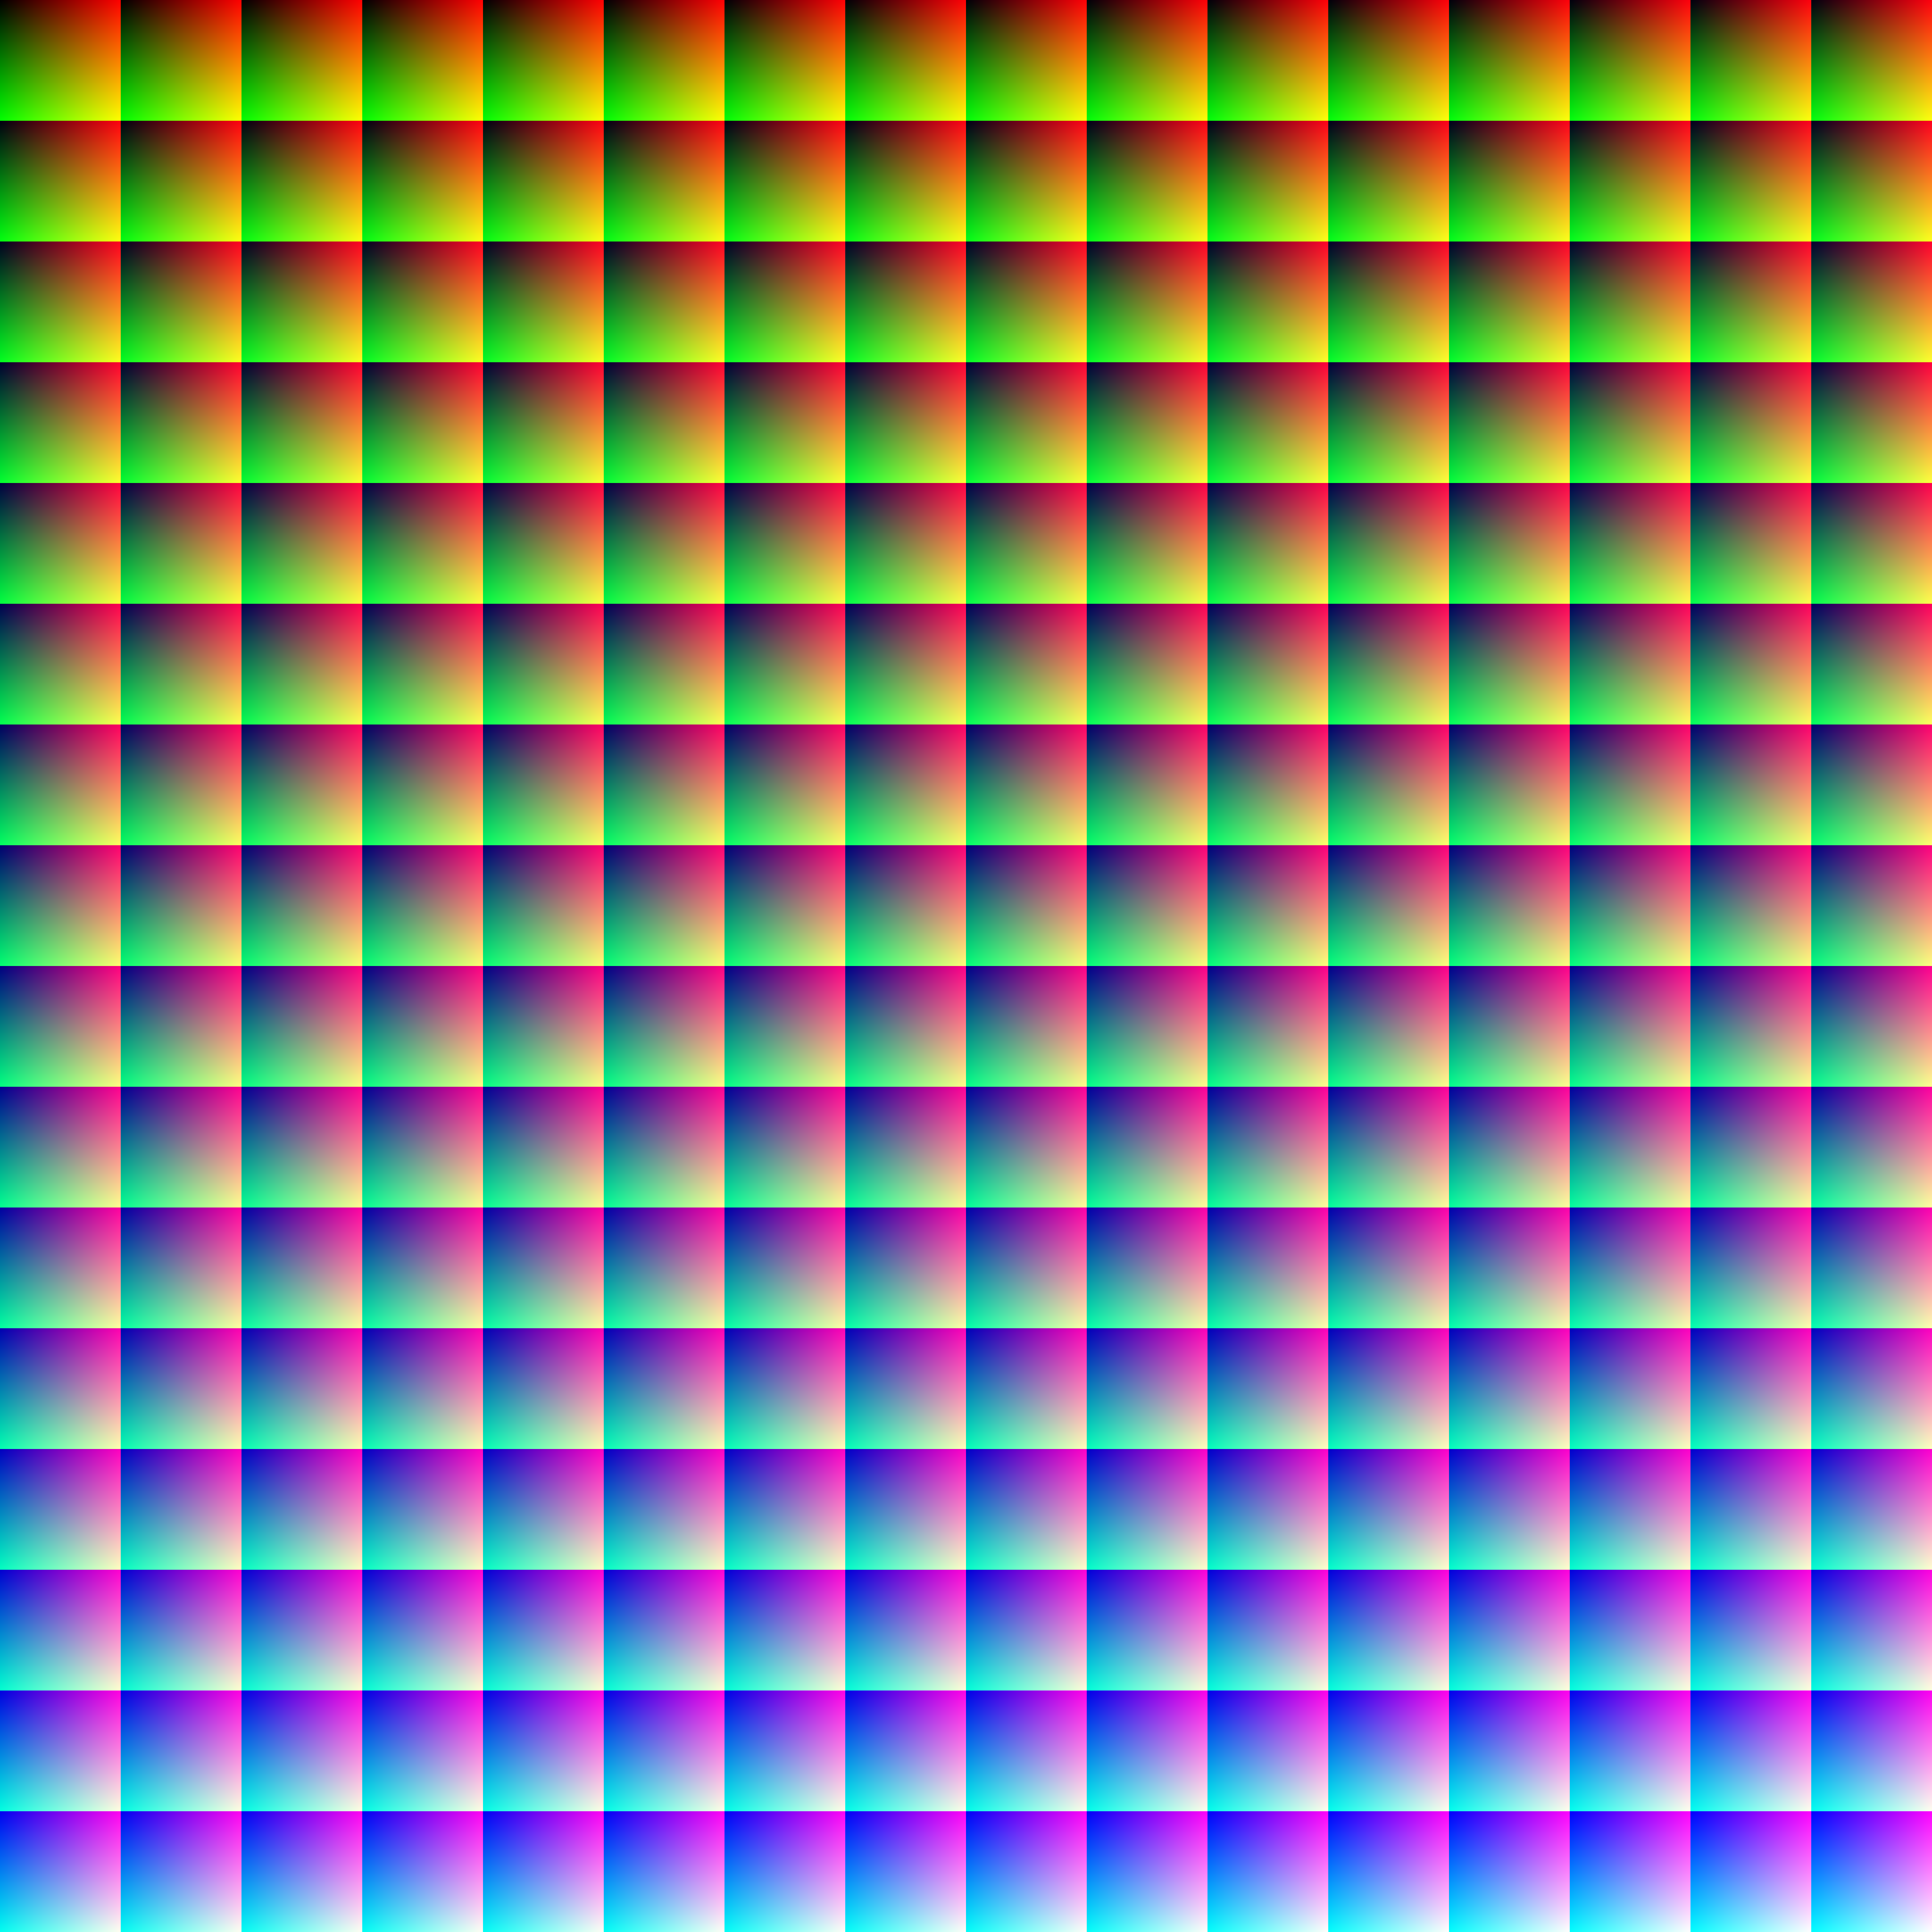 third-anniversary_post-182_bmp-implementation-in-c_all-sixteen-million-colors.png